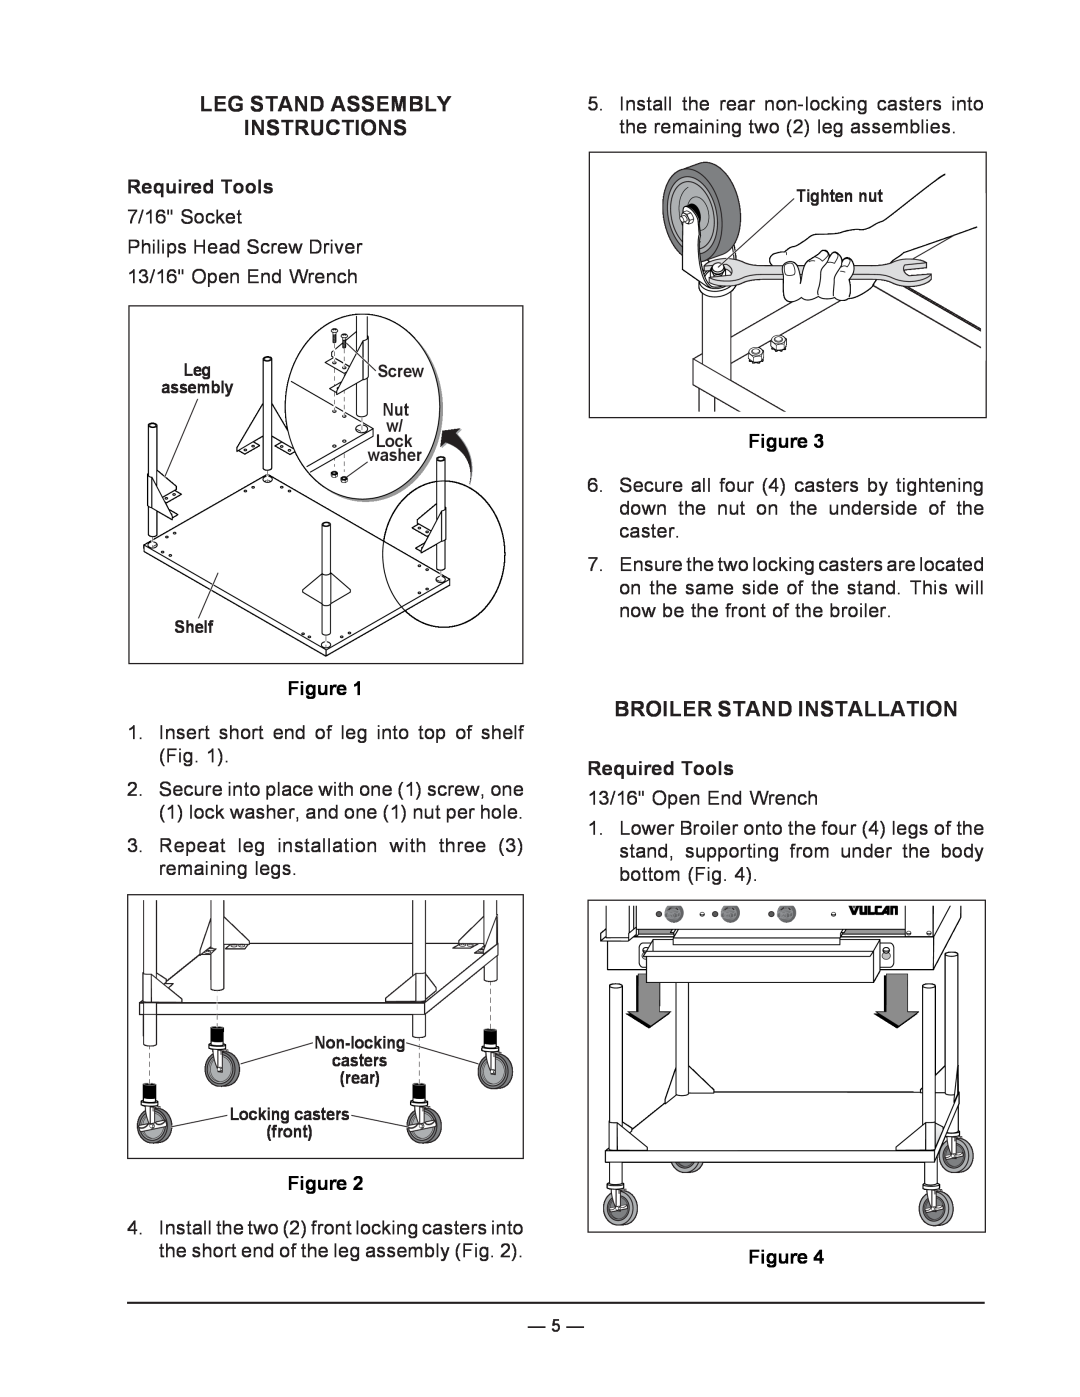 Vulcan-Hart VST4B, ML-136590 operation manual Leg Stand Assembly Instructions, Broiler Stand Installation 